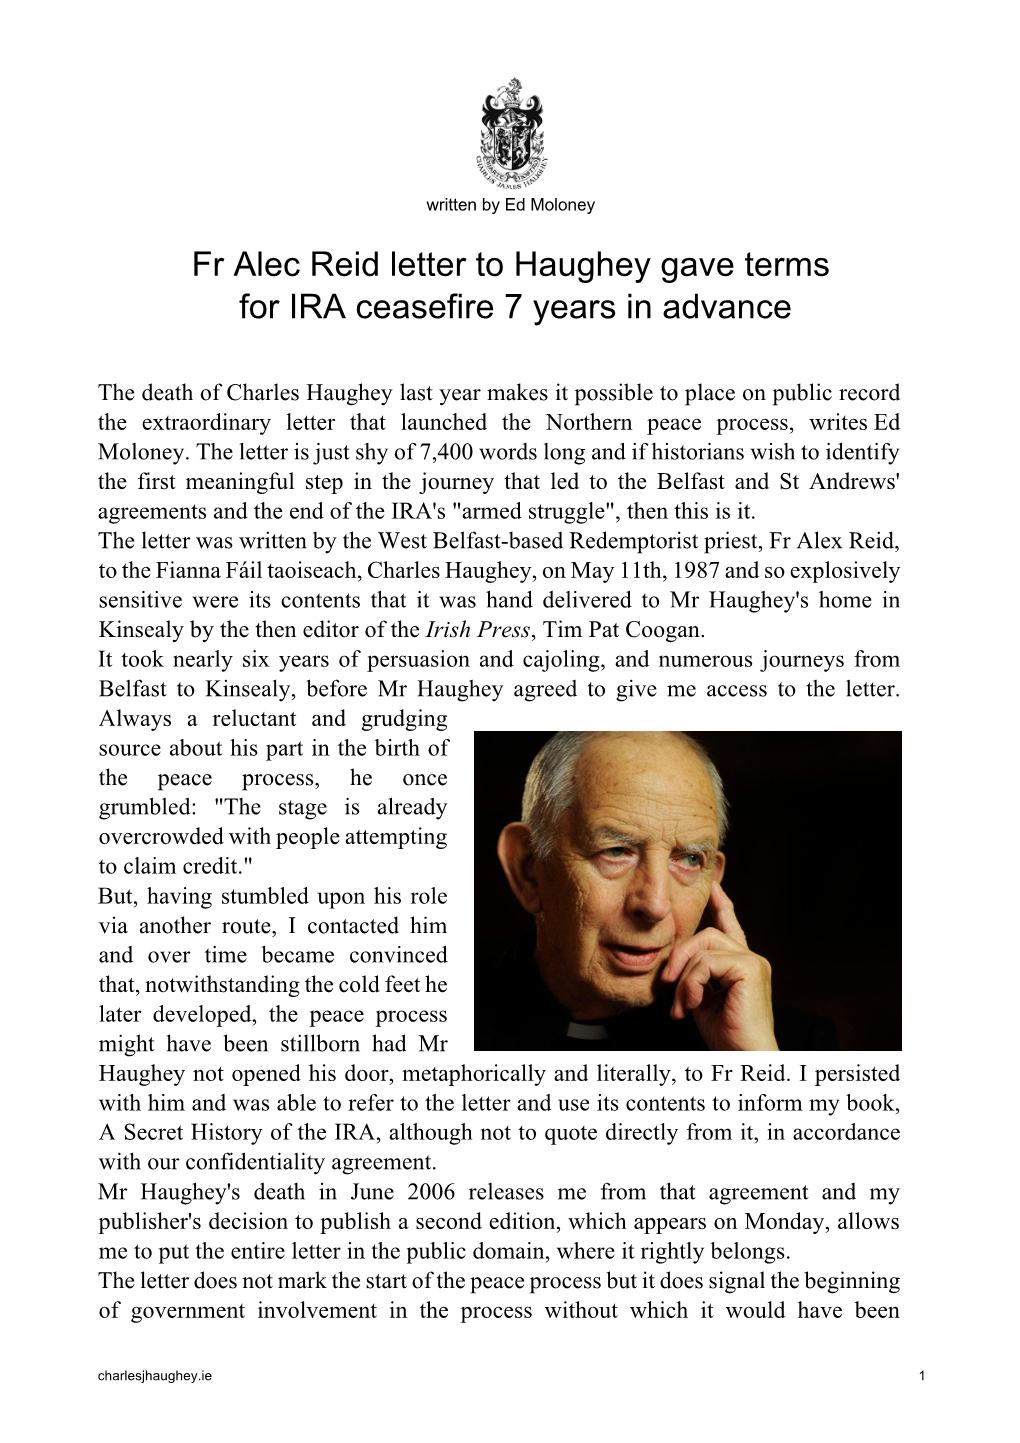 Fr Alec Reid Letter to Haughey Gave Terms for IRA Ceasefire 7 Years in Advance